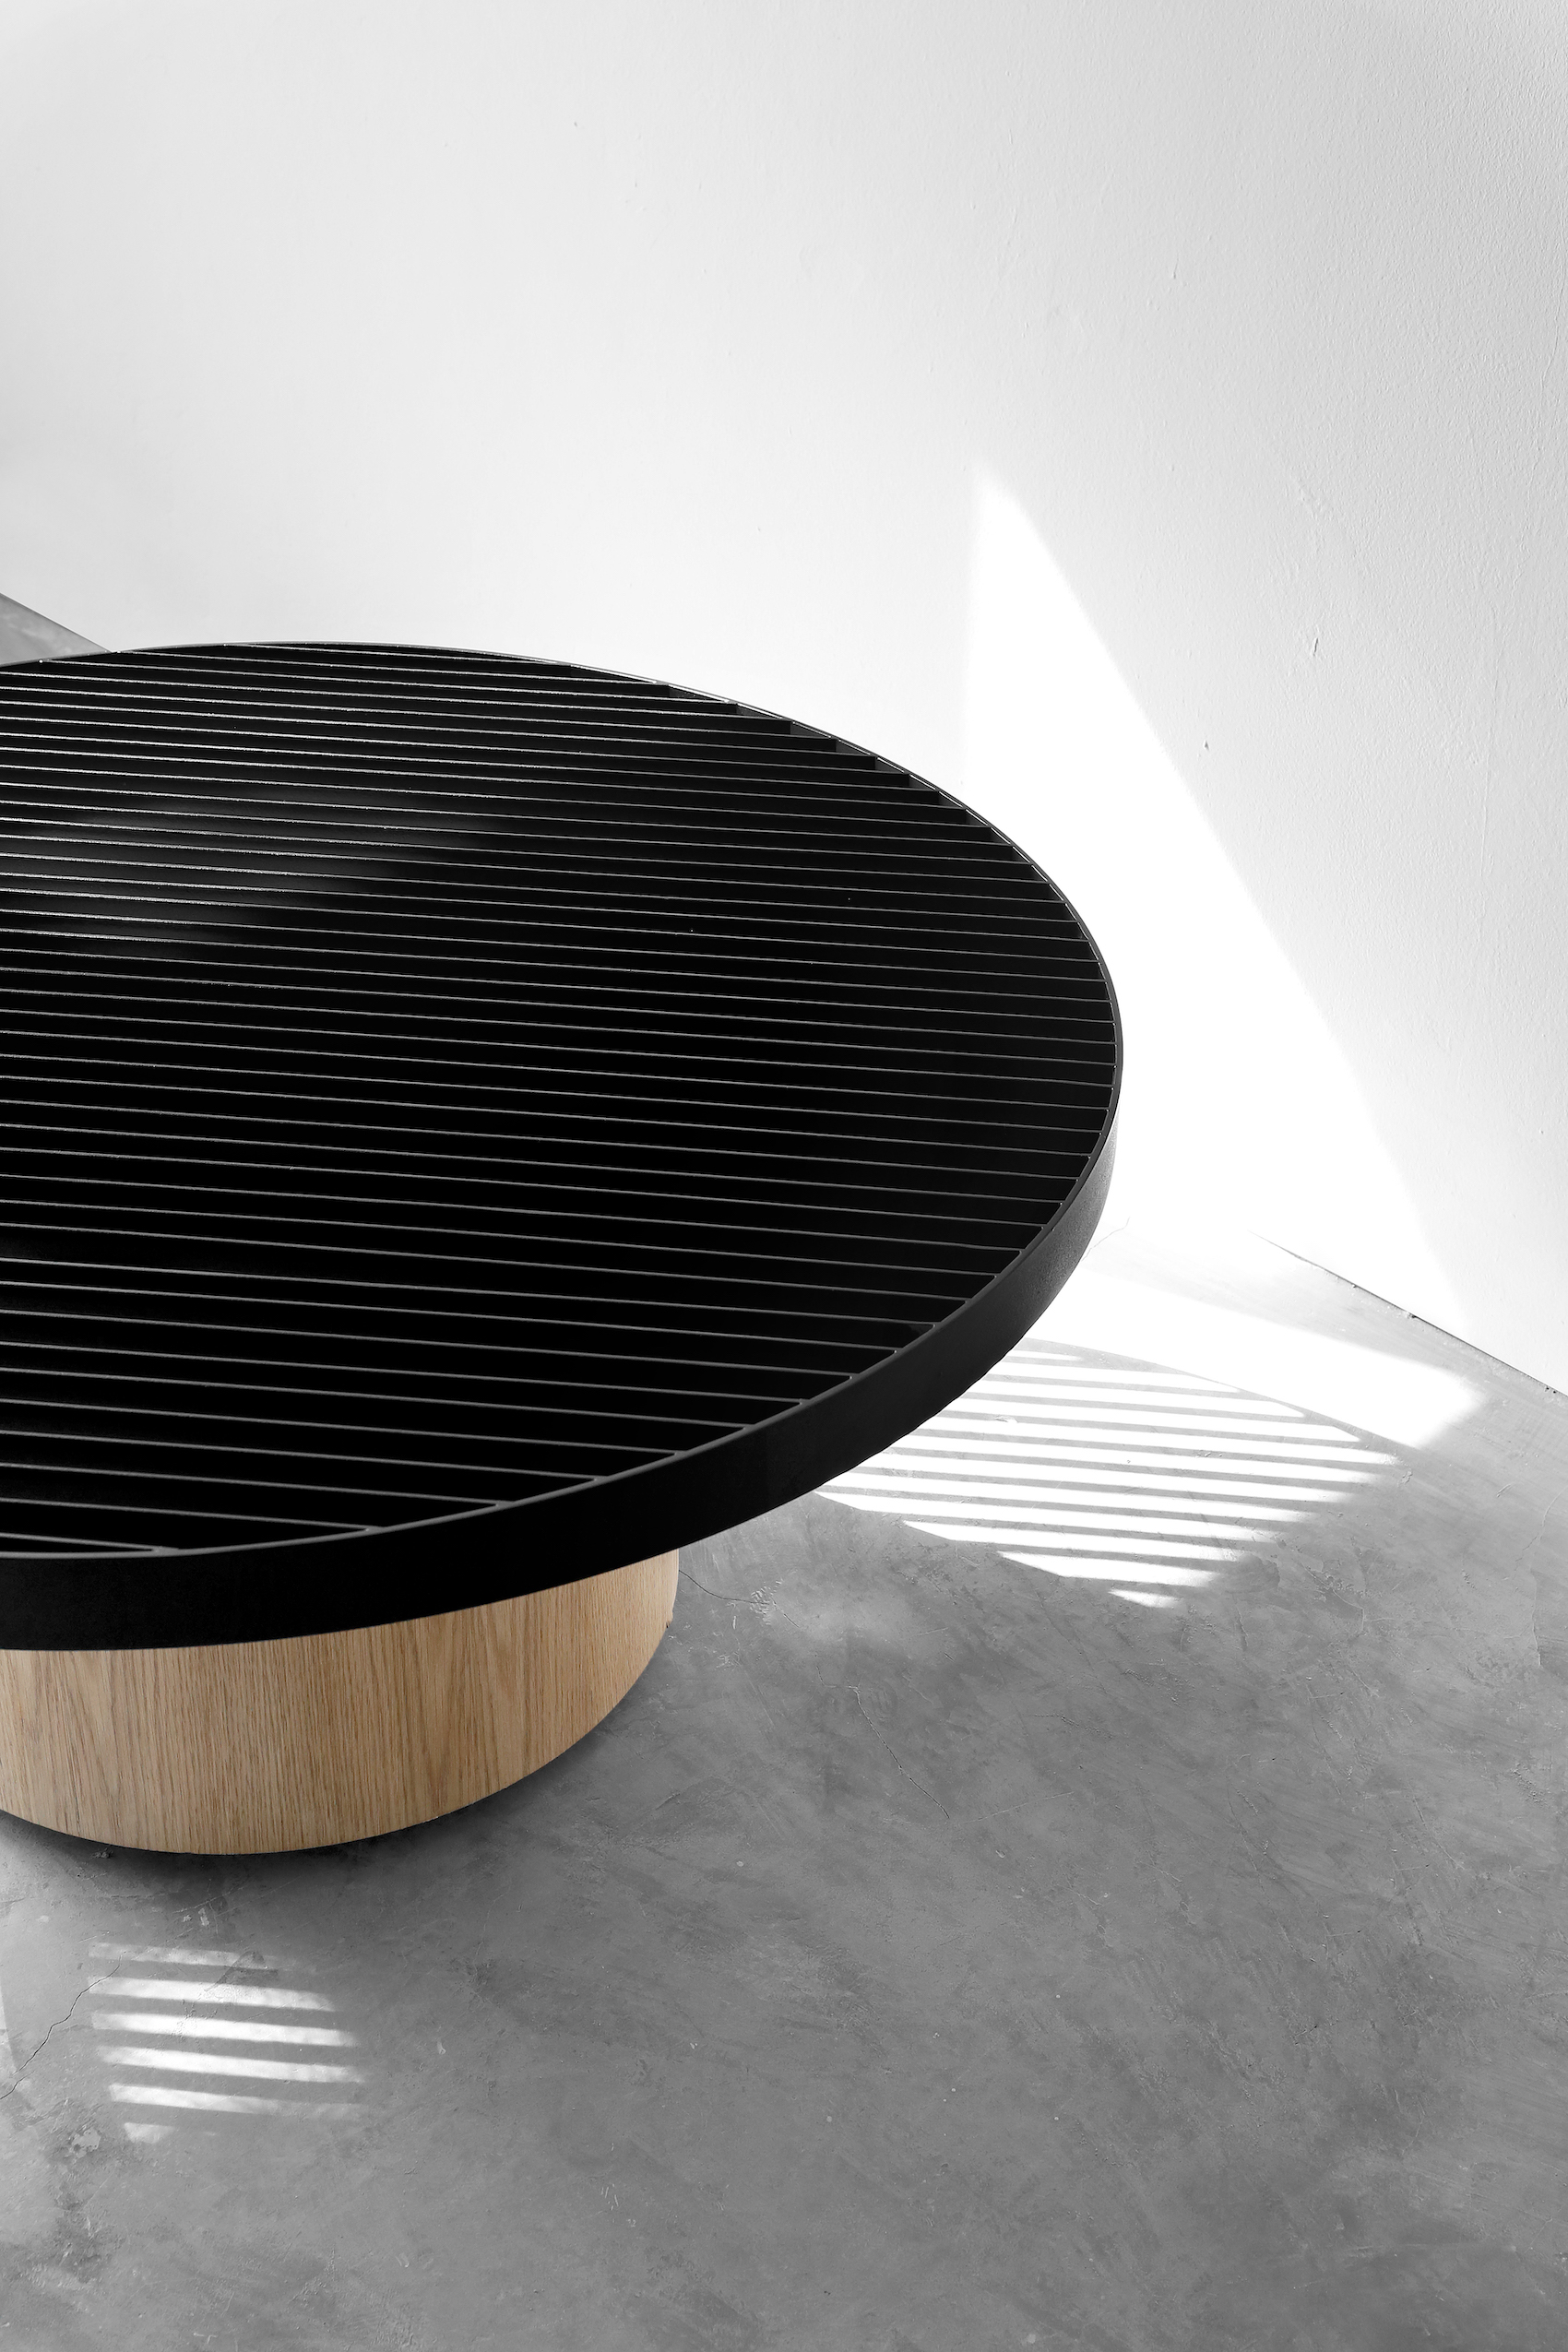 Minimalist Collection of Furniture "Laws of Motion" by Joel Escalona for BREUR